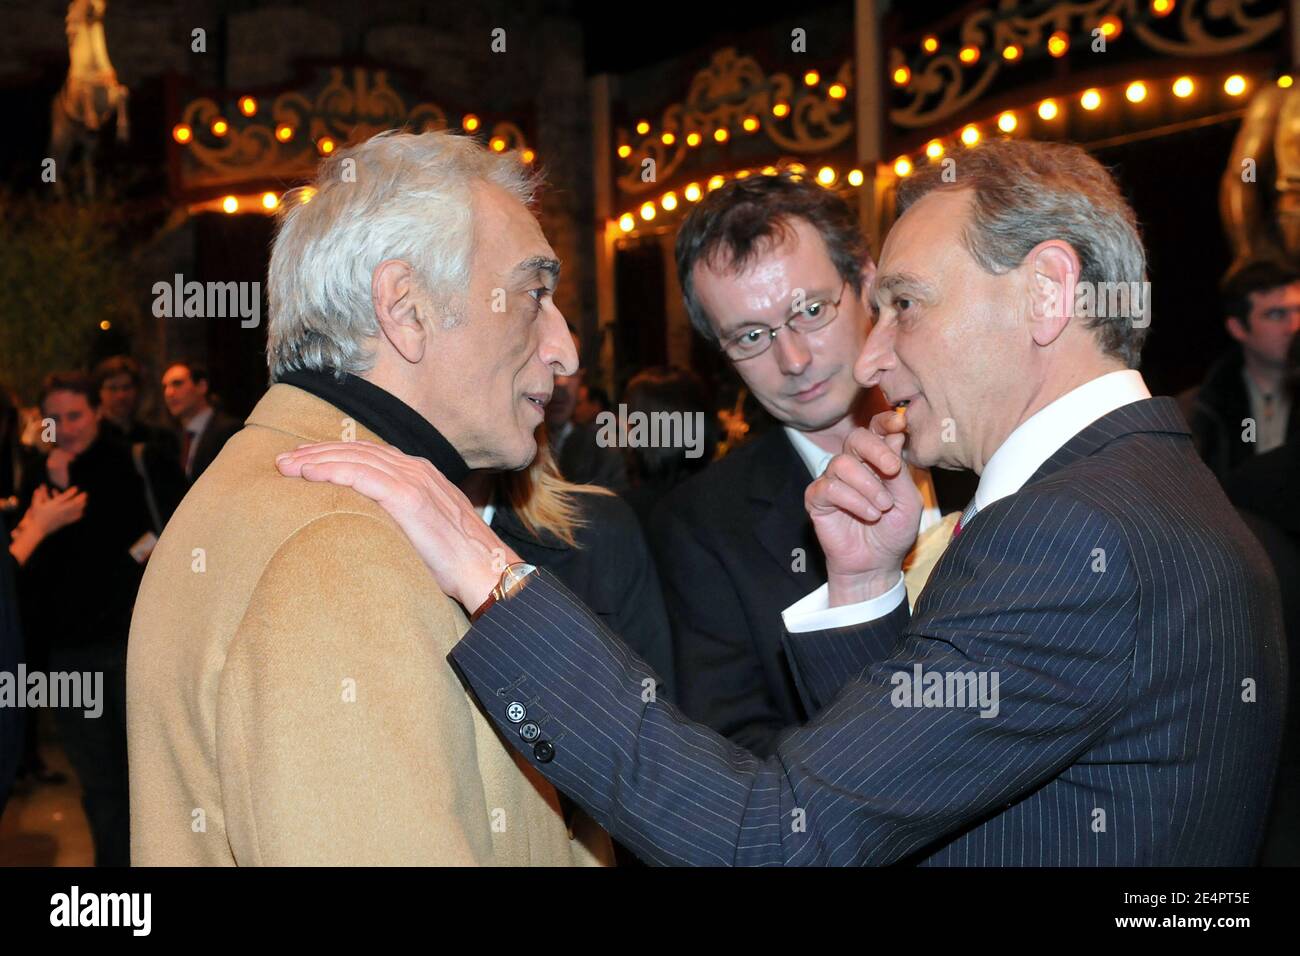 Paris Mayor Bertrand Delanoe and French actor Gerard Darmon seen during a meeting to support Bertrand Delanoe for mayoral elections at the 'Musee des Arts Forains' in Paris, France, on February 18, 2008. Photo by Ammar Abd Rabbo/ABACAPRESS.COM Stock Photo